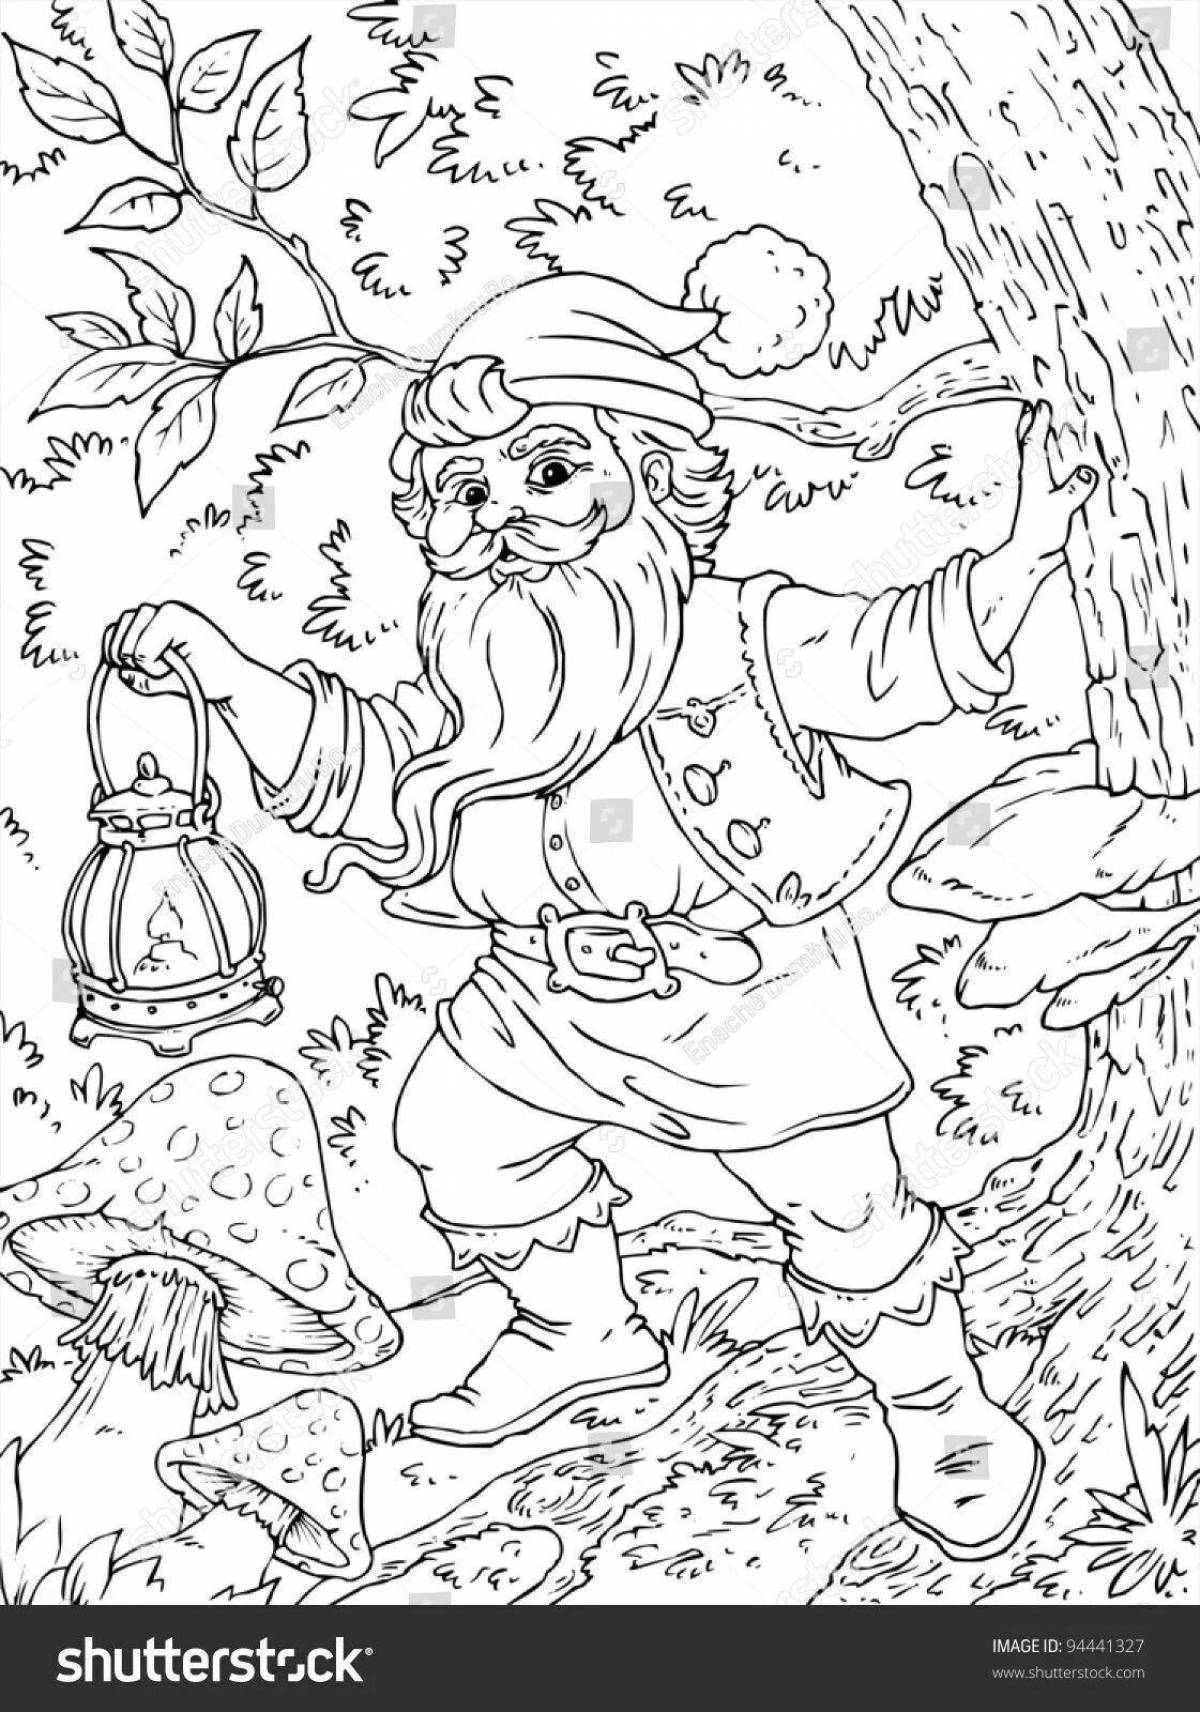 Coloring book dazzling lumberjack for students